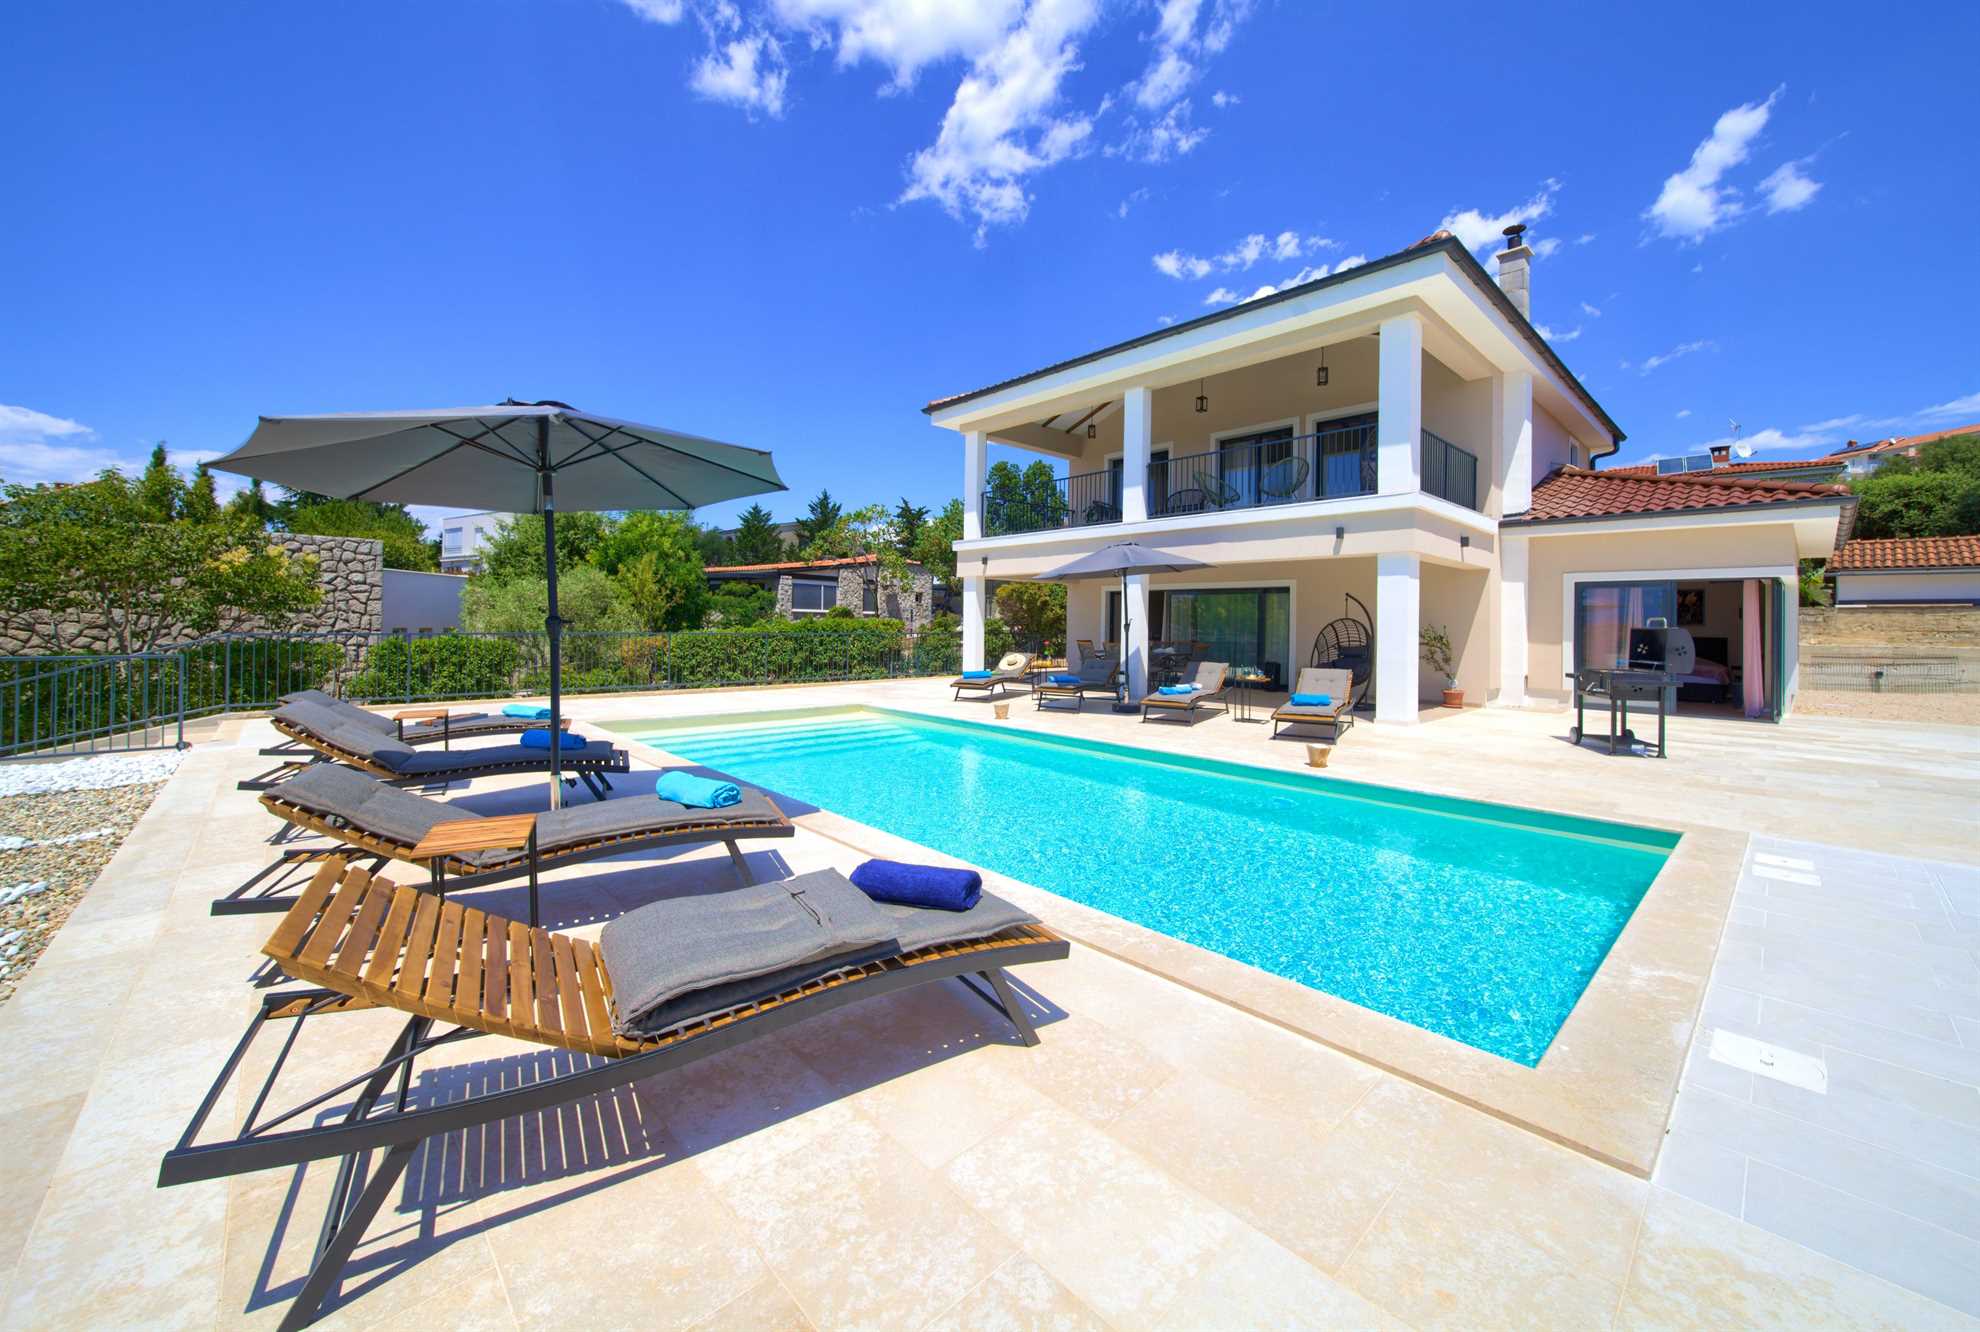 Villa Magnifica with a swimming pool and sun loungers.